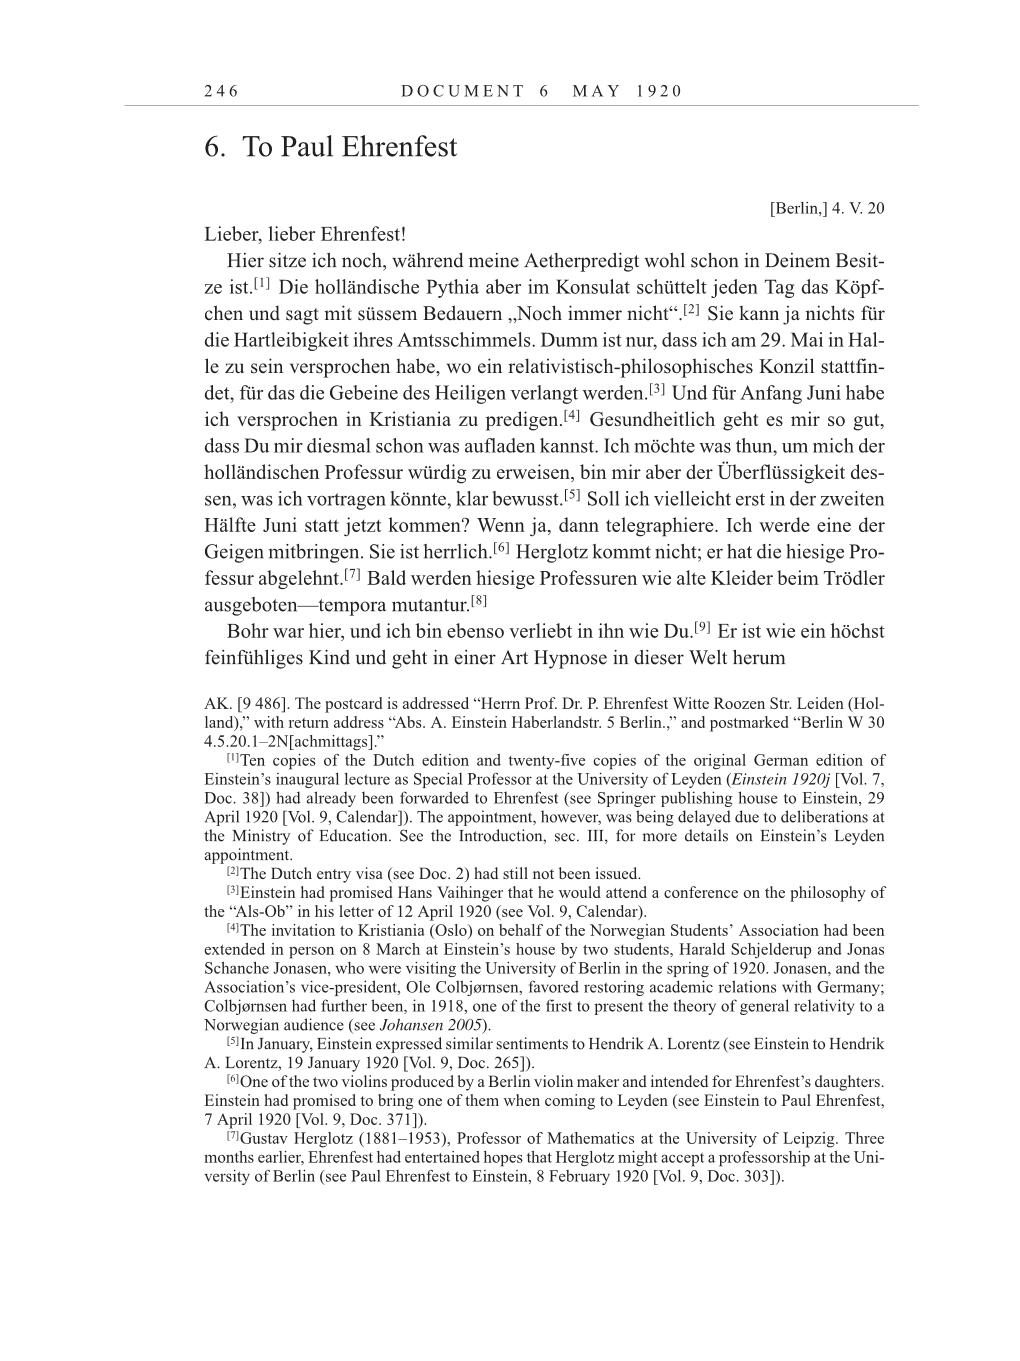 Volume 10: The Berlin Years: Correspondence May-December 1920 / Supplementary Correspondence 1909-1920 page 246